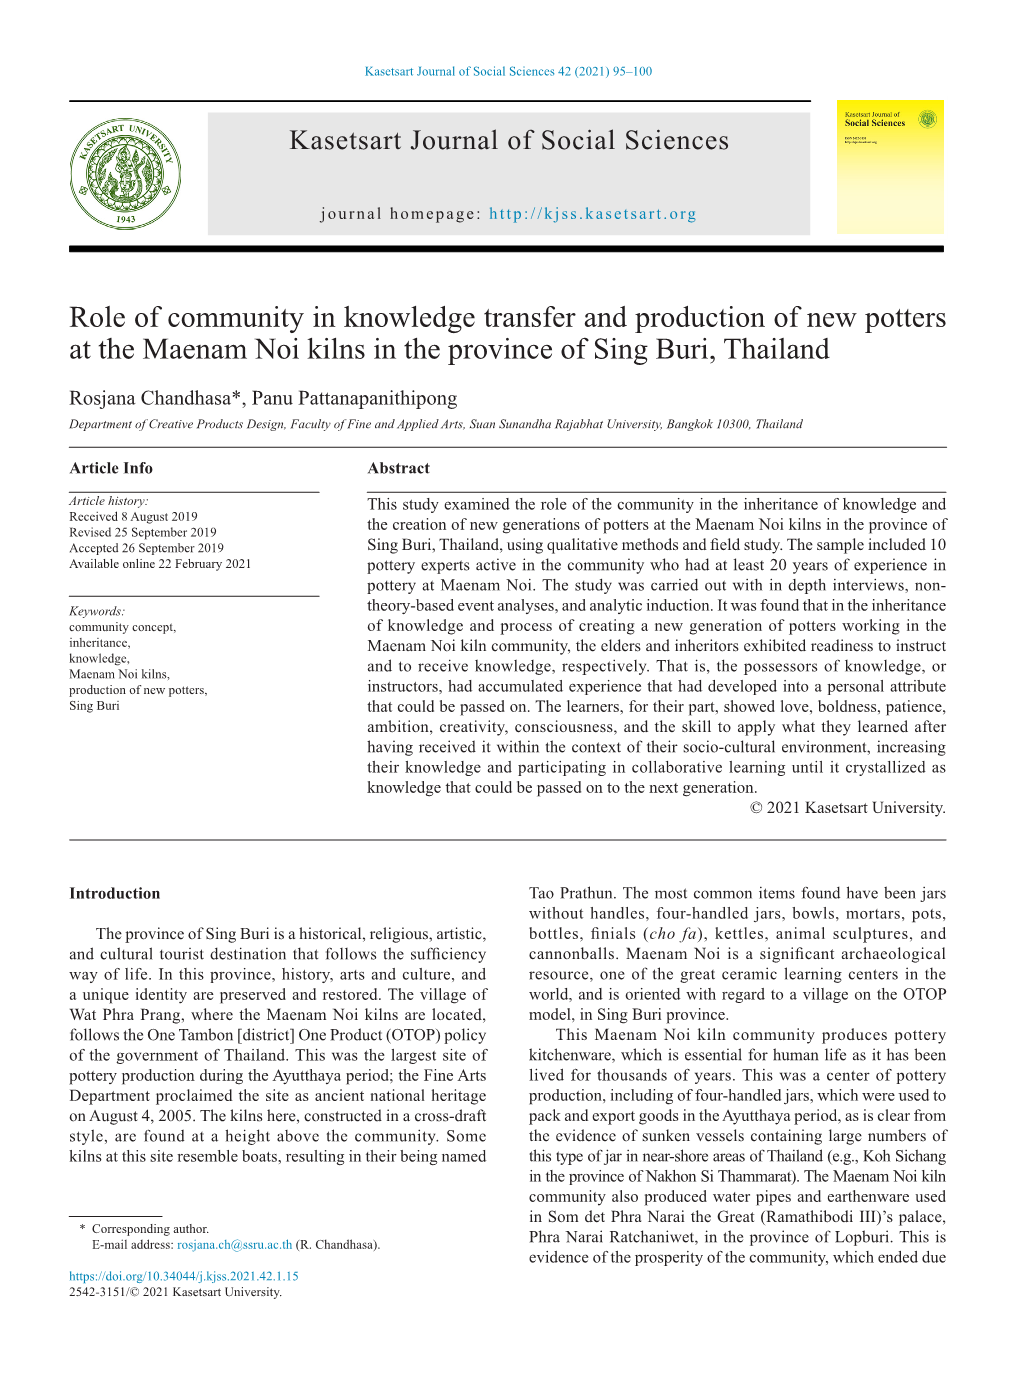 Role of Community in Knowledge Transfer and Production of New Potters at the Maenam Noi Kilns in the Province of Sing Buri, Thailand